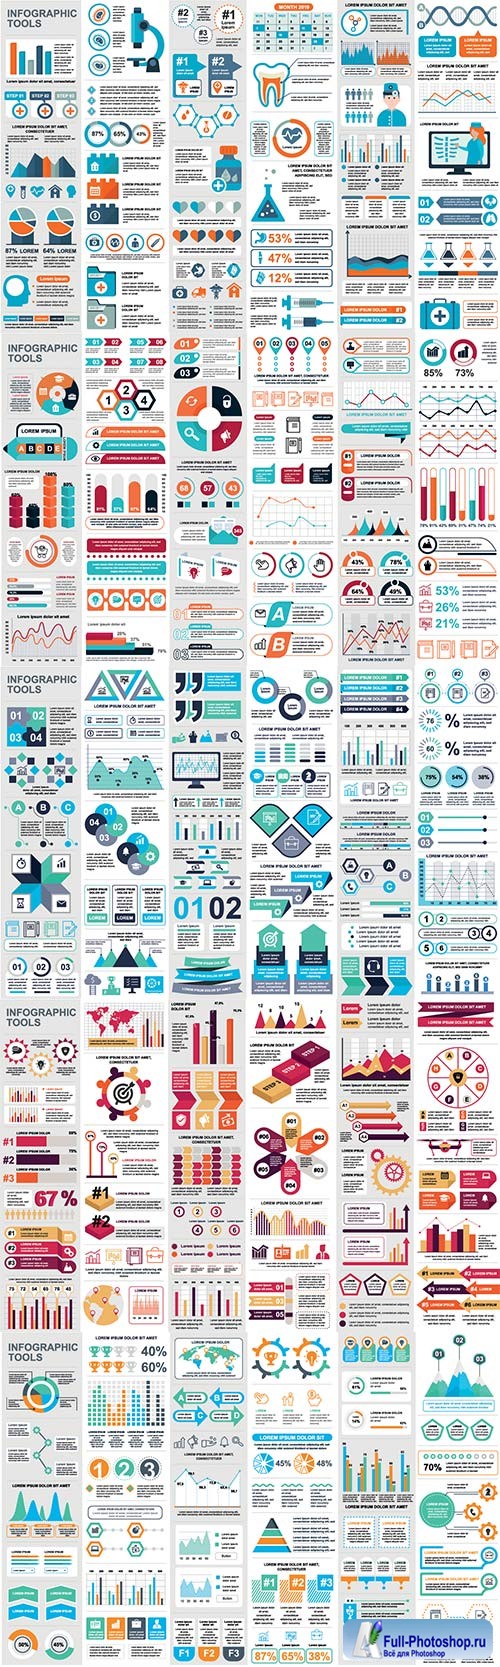 Infographic elements data visualization vector # 4